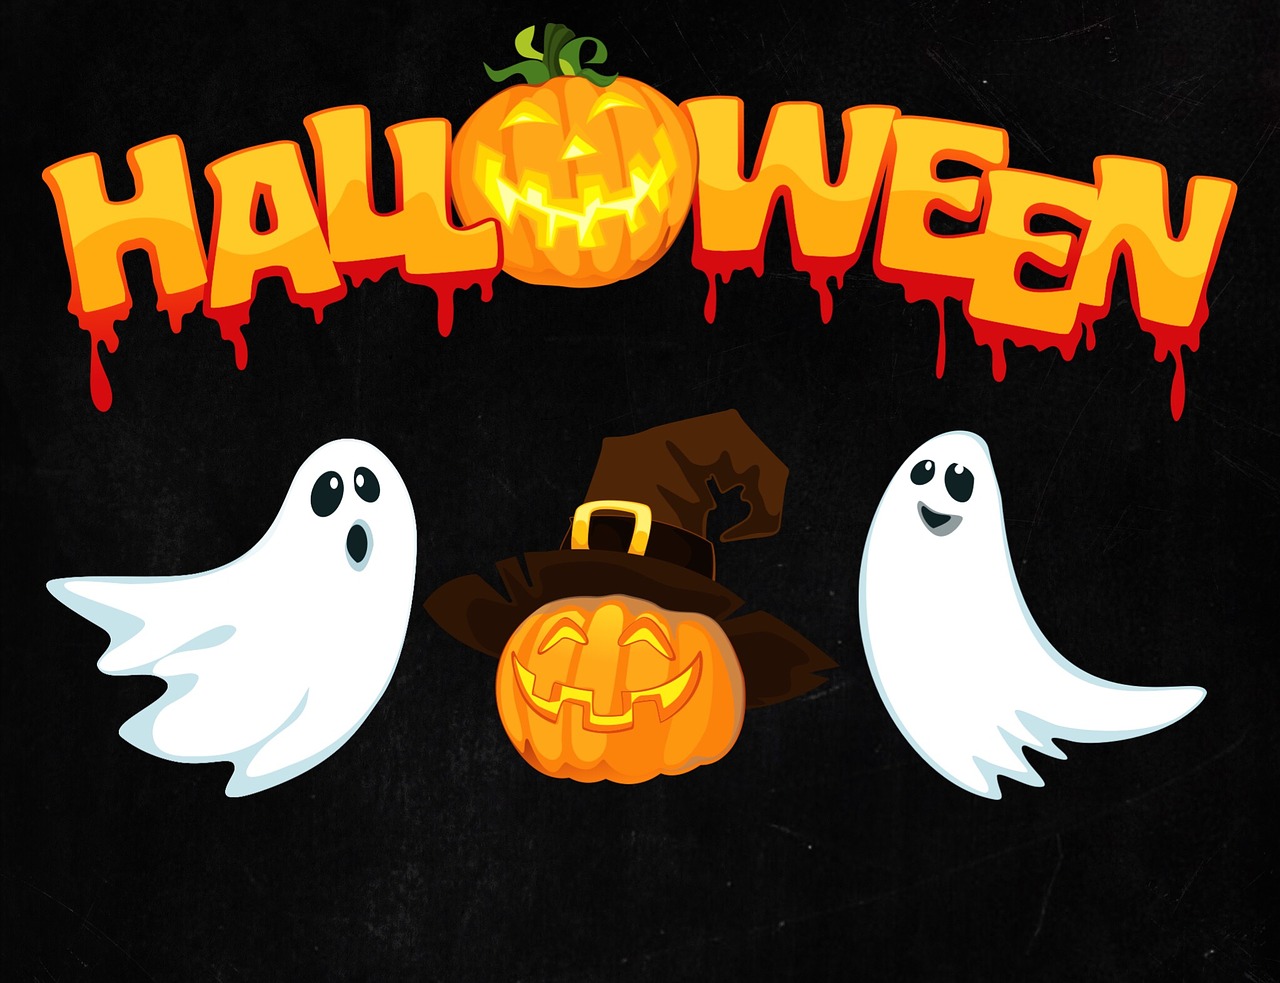 You are currently viewing Résultats du concours “Dessins d’Halloween”